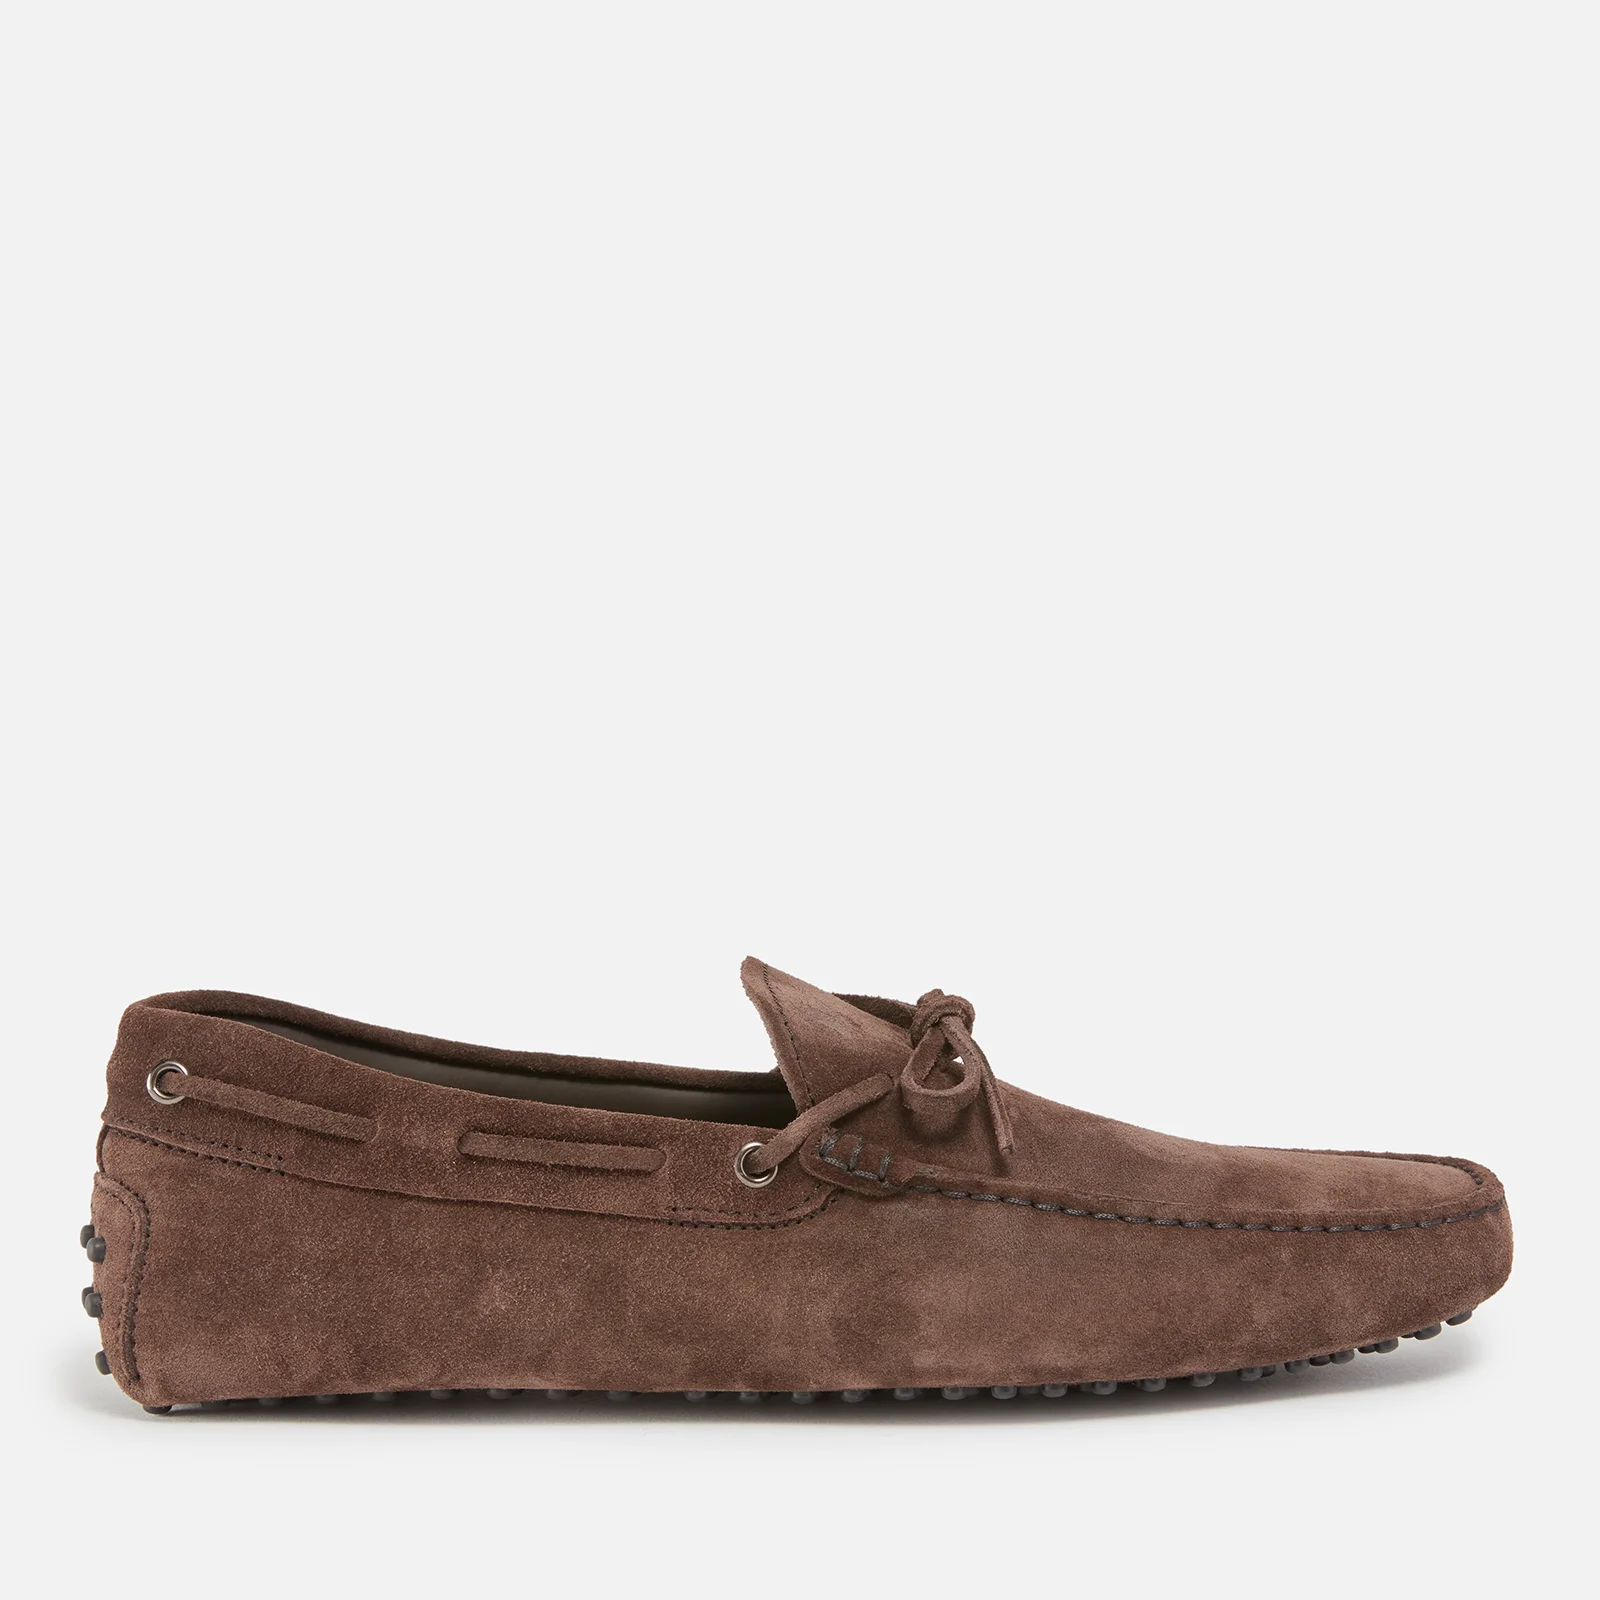 Tod's Men's Suede Driving Shoes - Moro Image 1